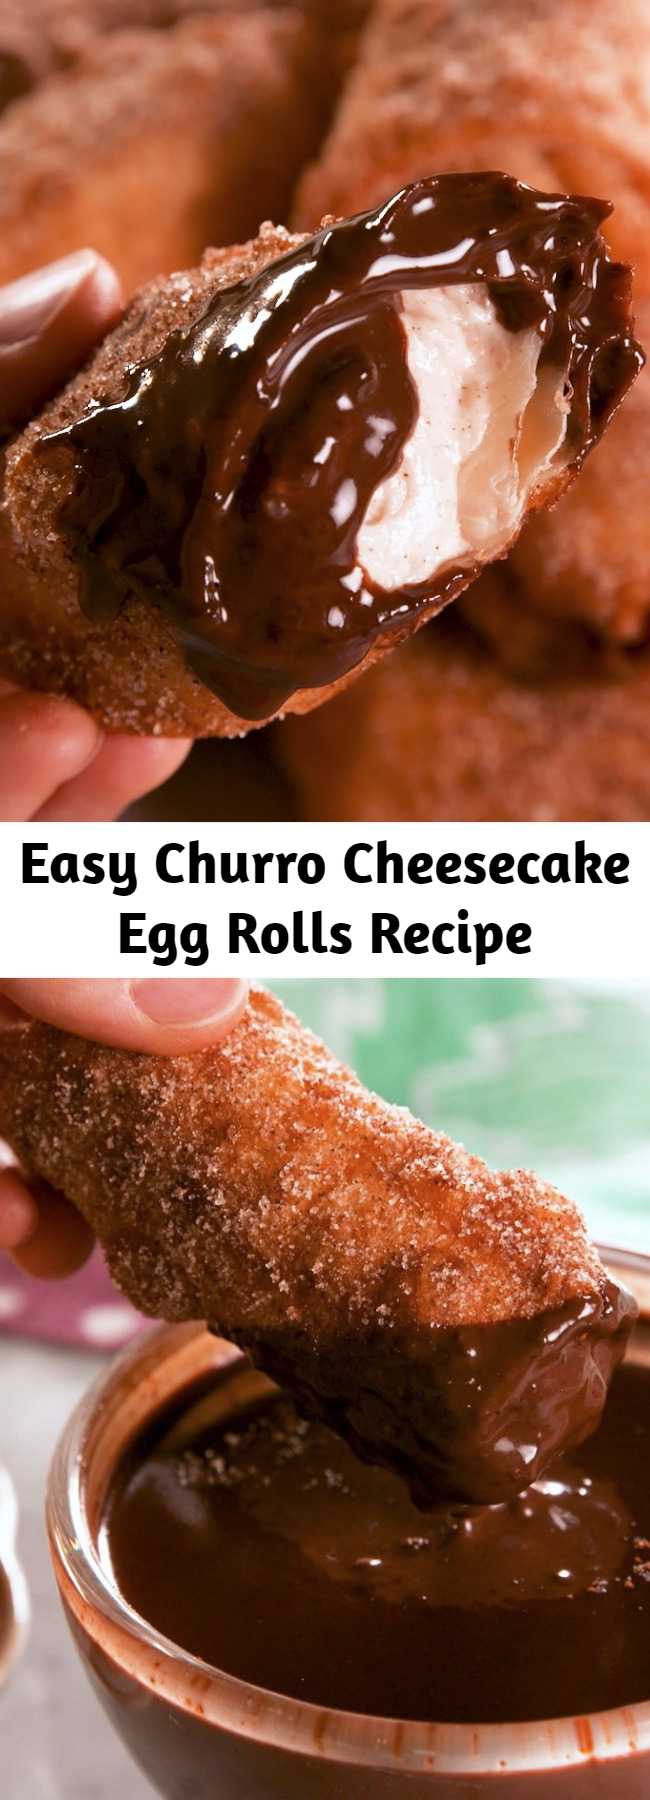 Easy Churro Cheesecake Egg Rolls Recipe - If you're a fan of churros and cheesecake, this dessert was made for you. Ready in just 30 minutes and using a fraction of the normal amount of frying oil you'd need to cook churros, this treat is simple to make and perfect for sharing. #easy #recipe #churro #cheesecake #eggroll #dessert #chocolate #creamcheese